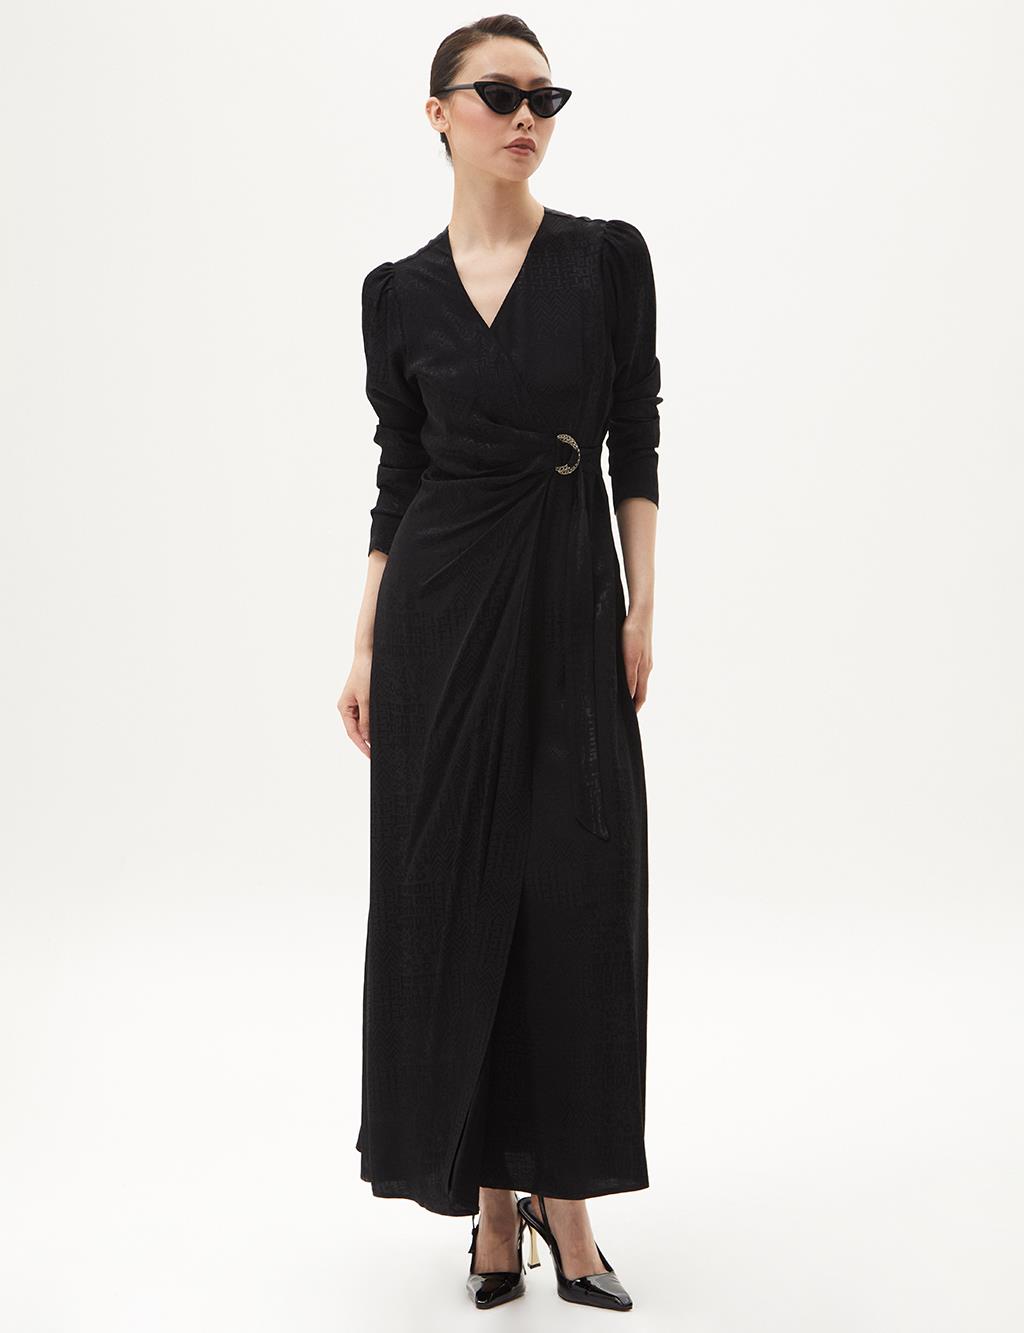 Stylish Dress Black with Metal Buckle Detail